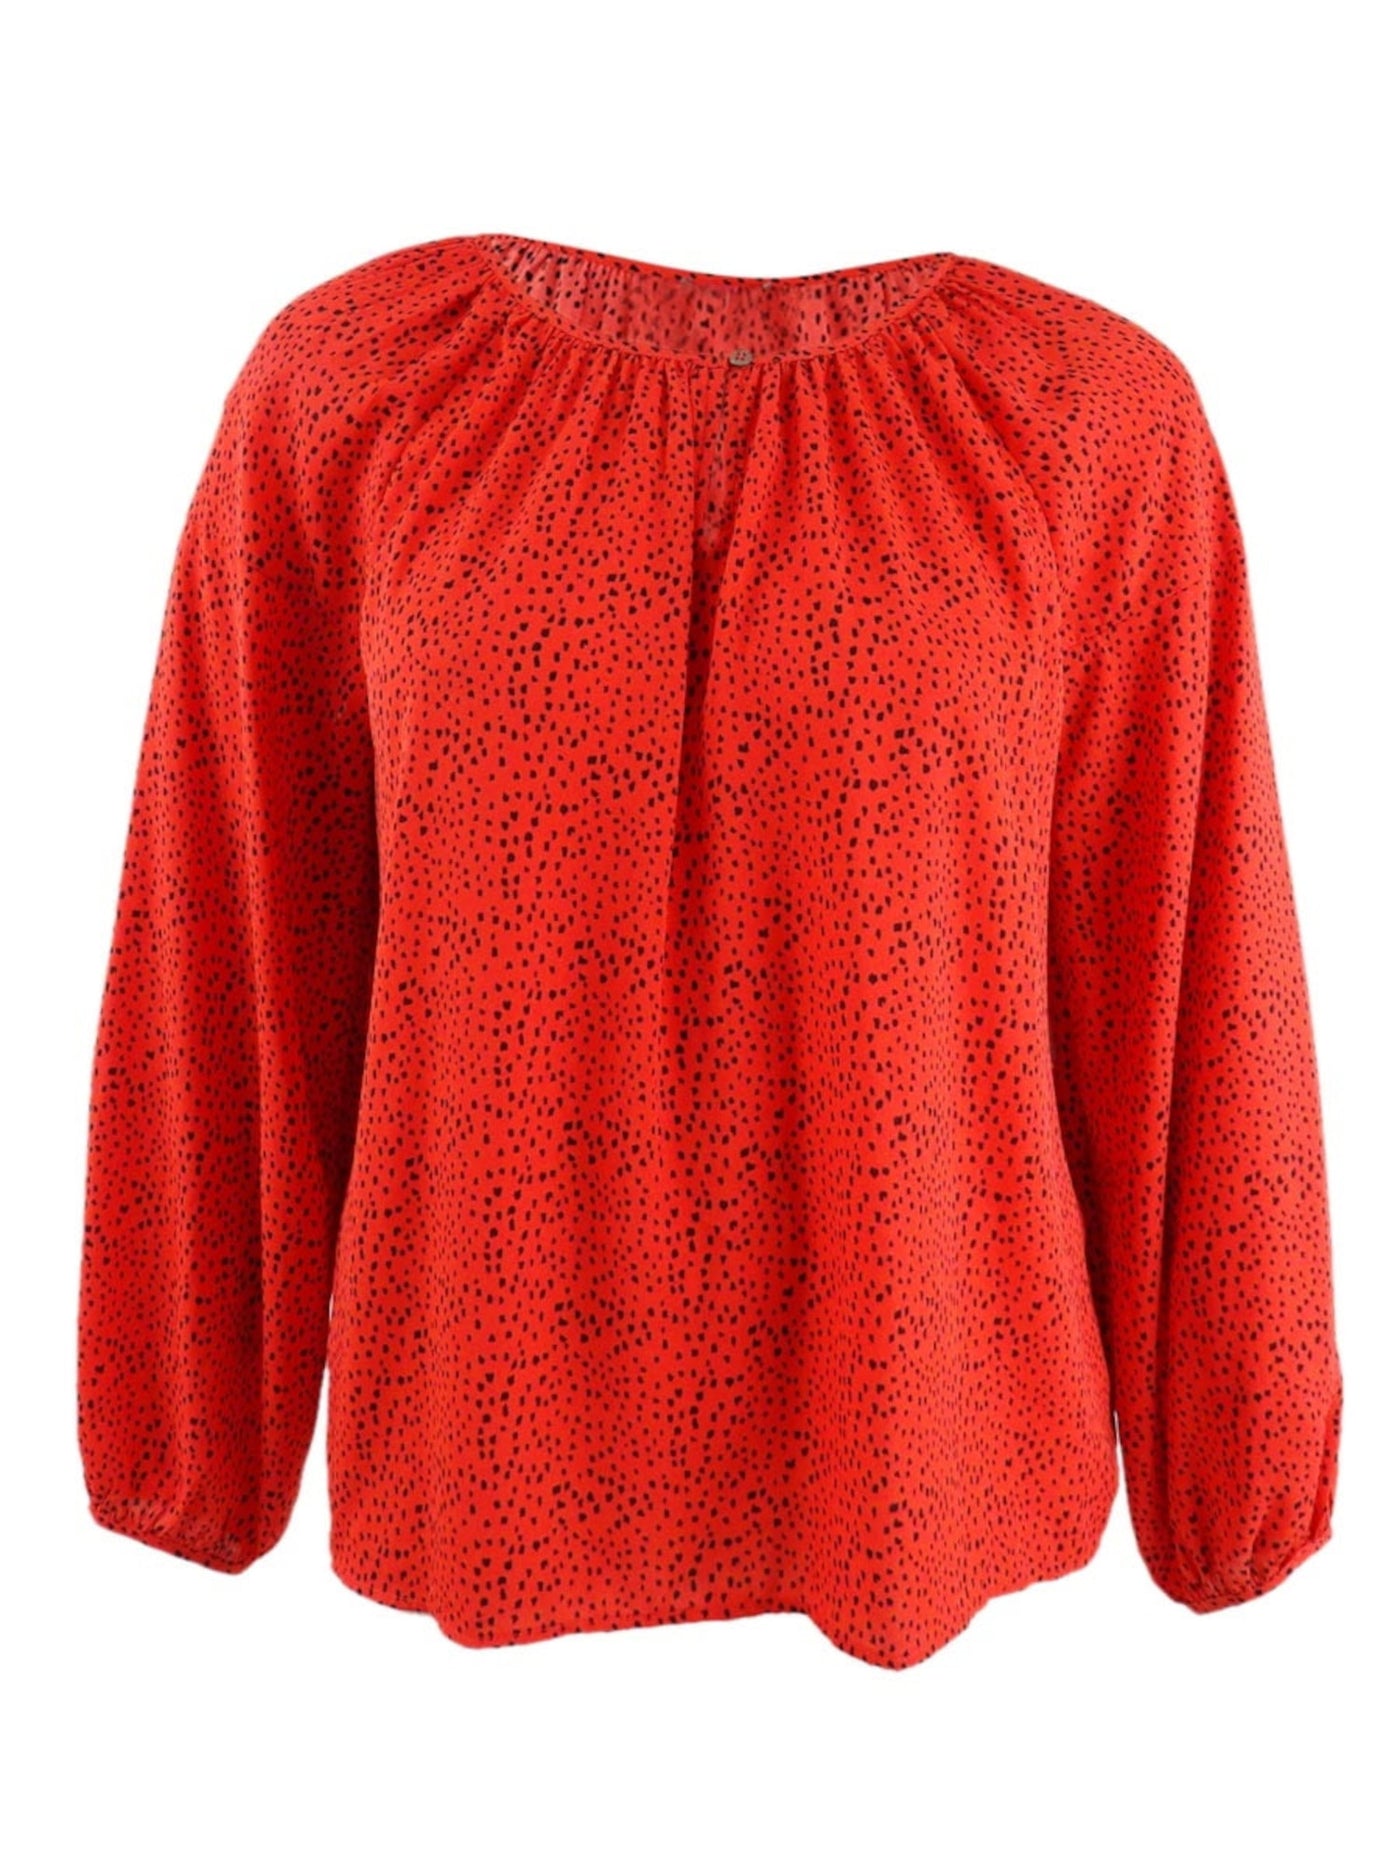 VINCE CAMUTO Womens Orange Gathered Unlined Drop Shoulders Pullover Polka Dot 3/4 Sleeve Keyhole Wear To Work Peasant Top S